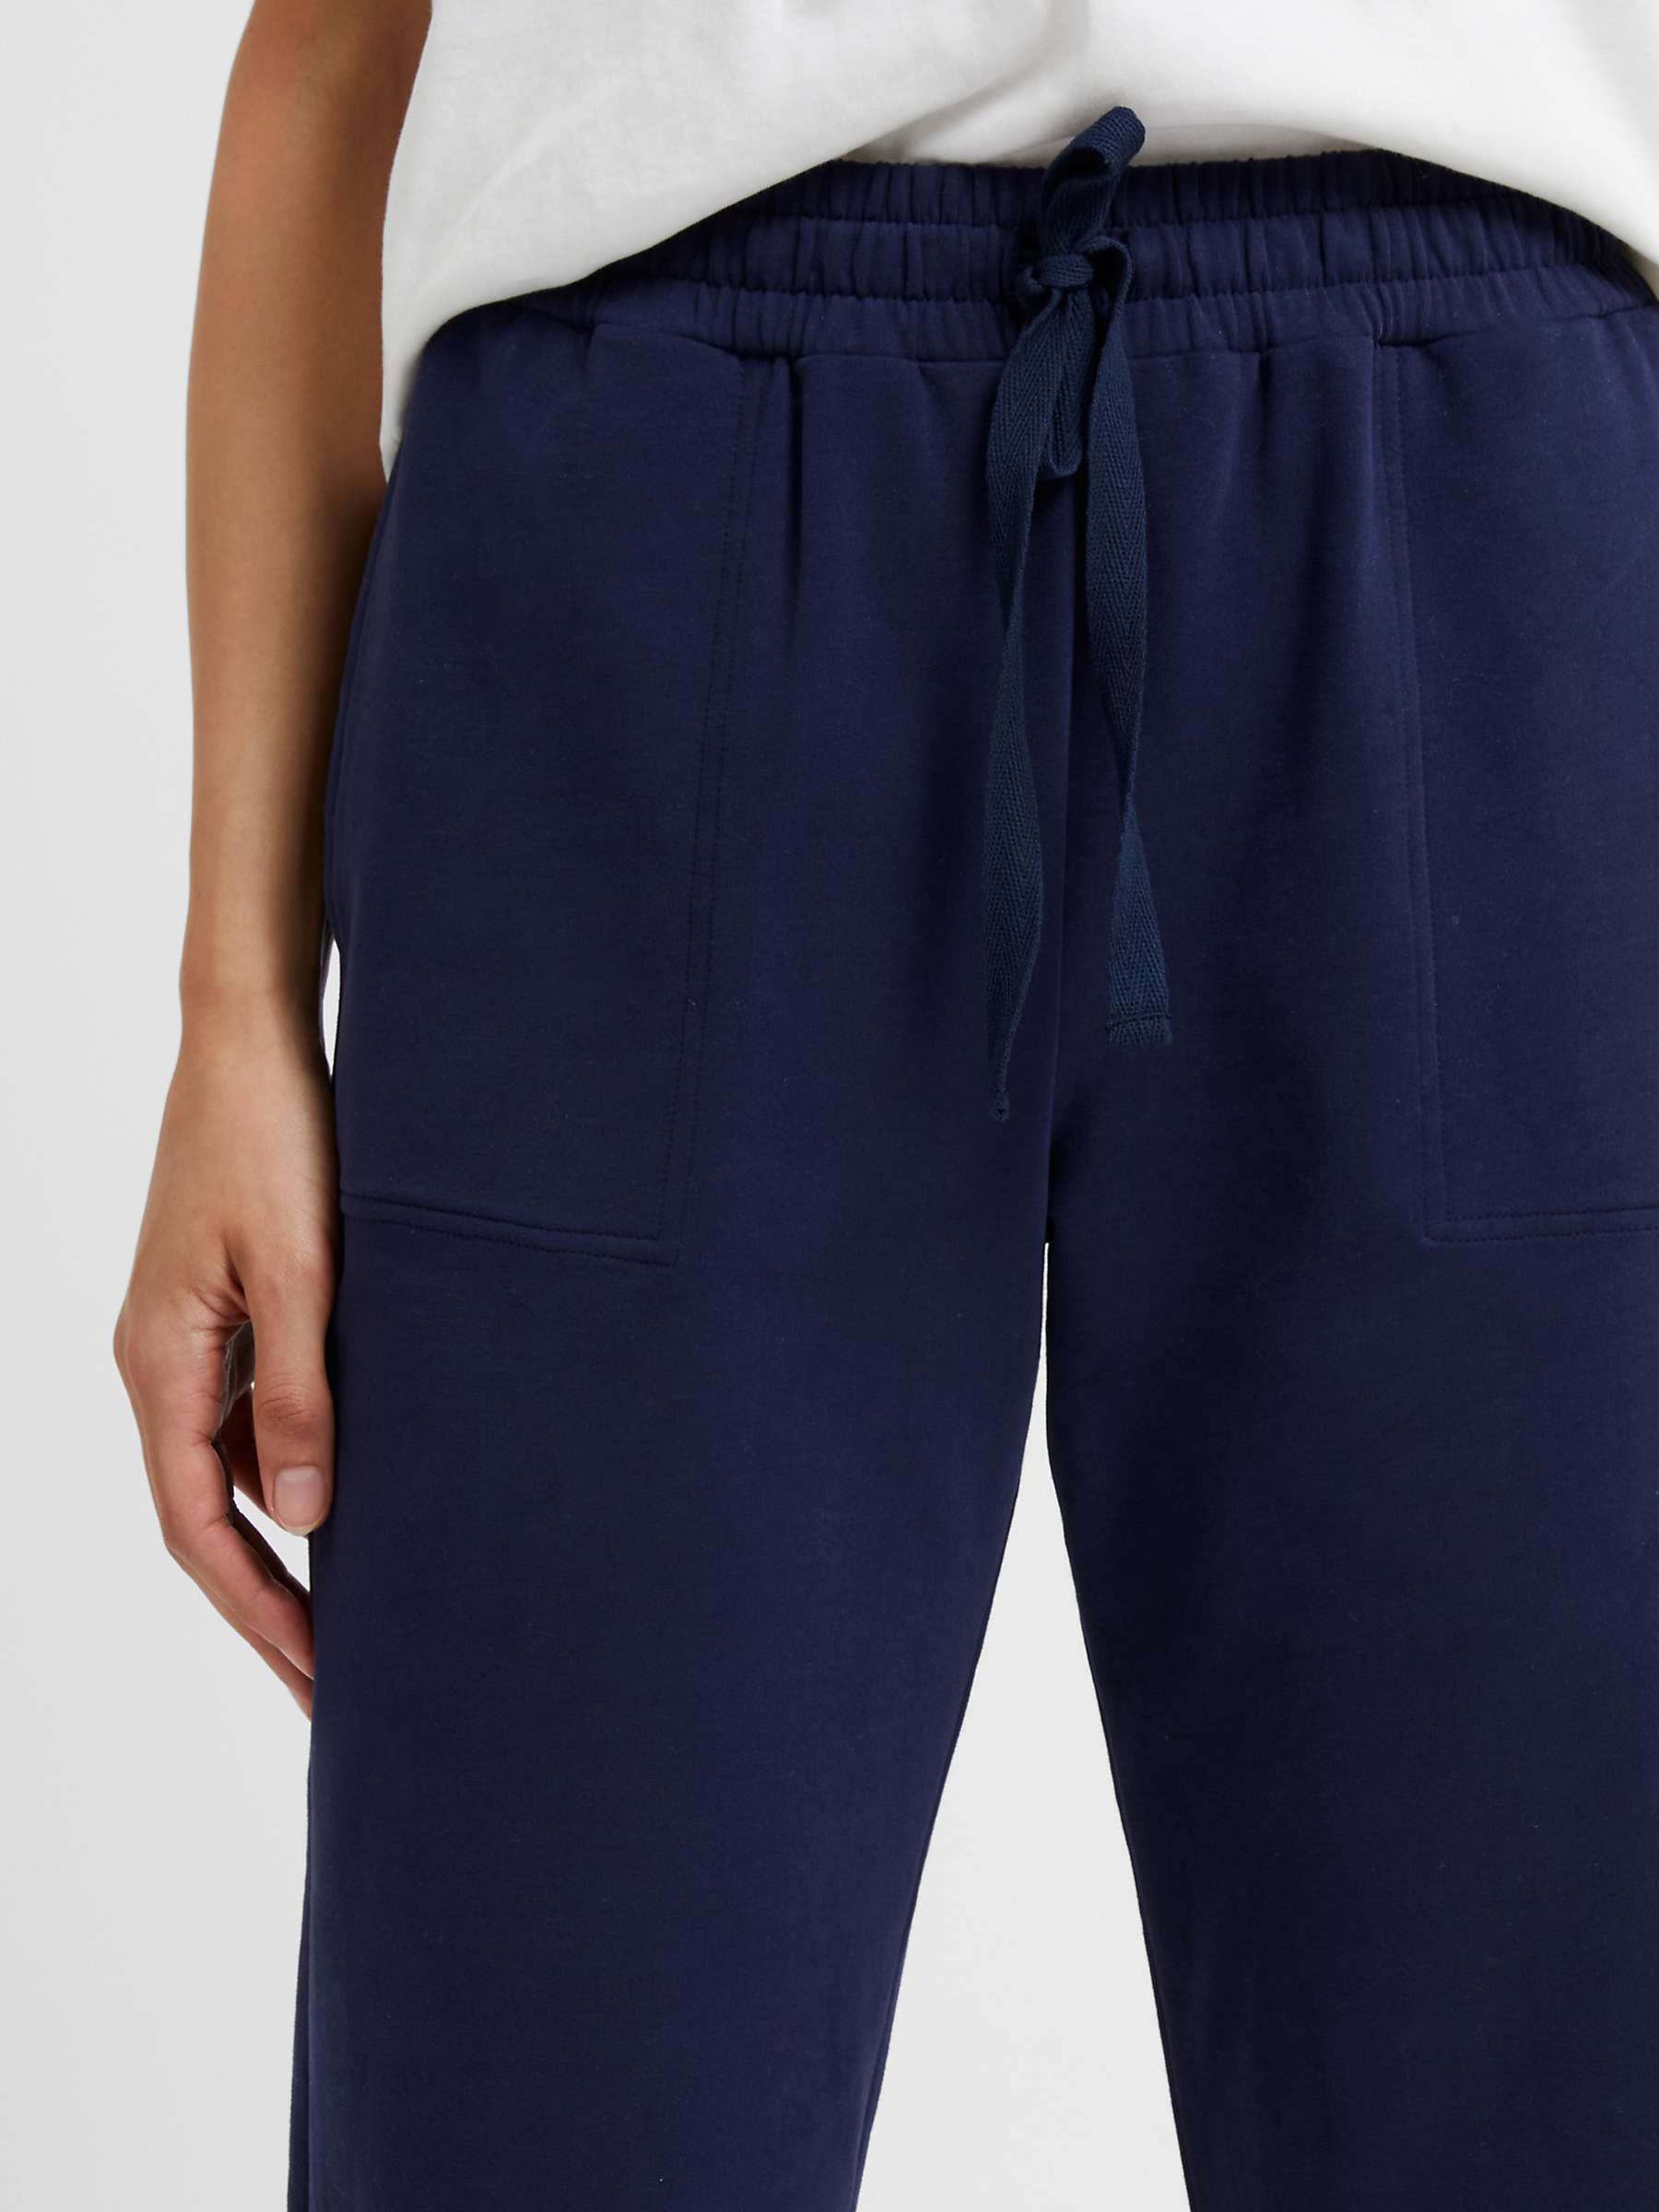 Buy Great Plains Peached Cotton Blend Joggers, Summer Navy Online at johnlewis.com